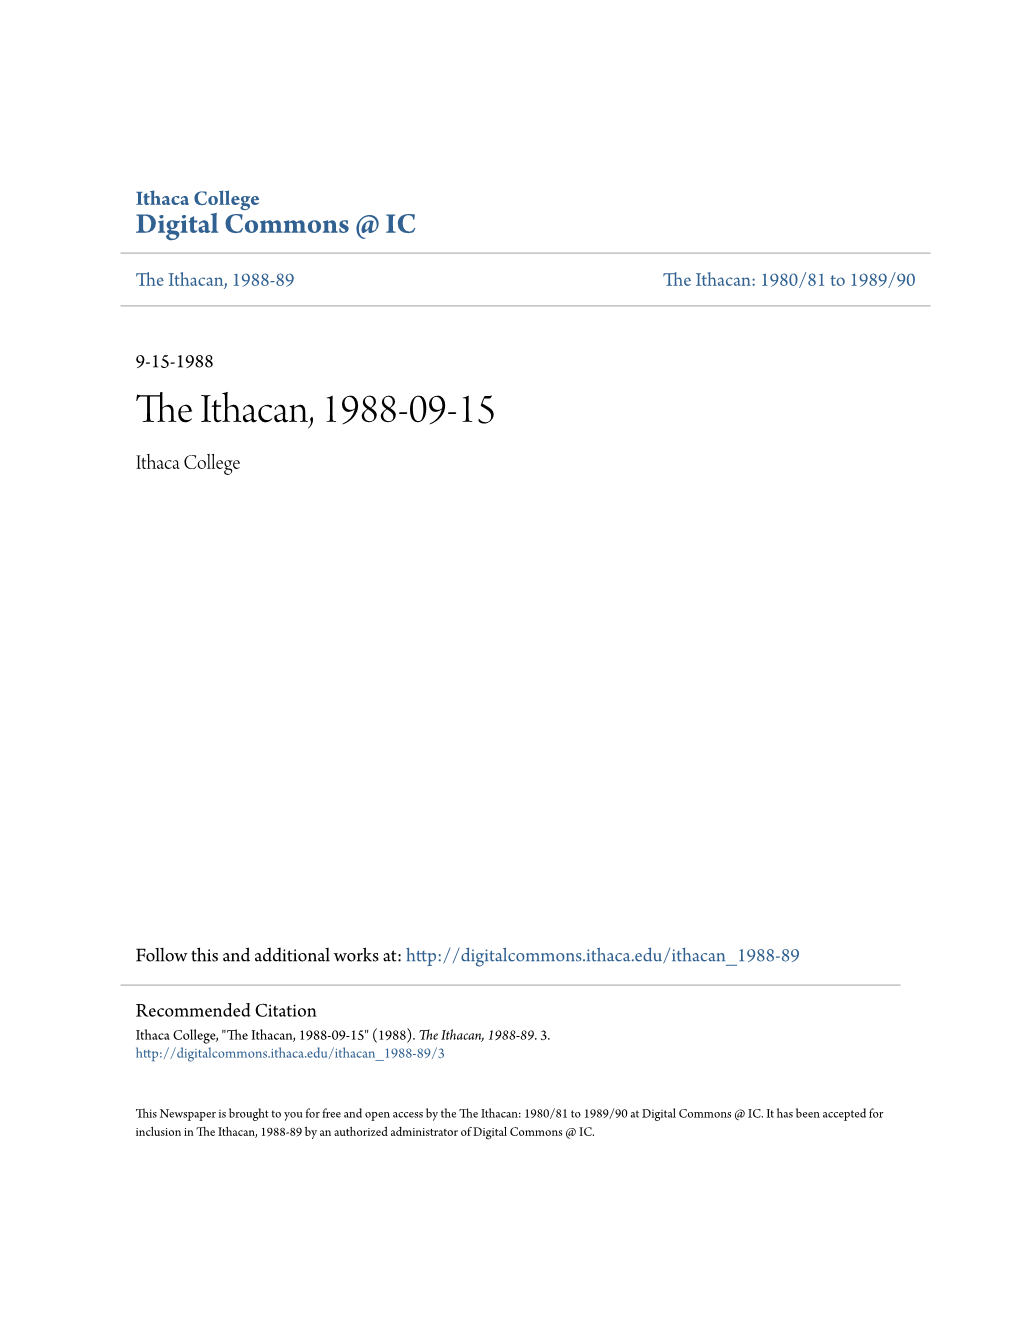 The Ithacan, 1988-09-15